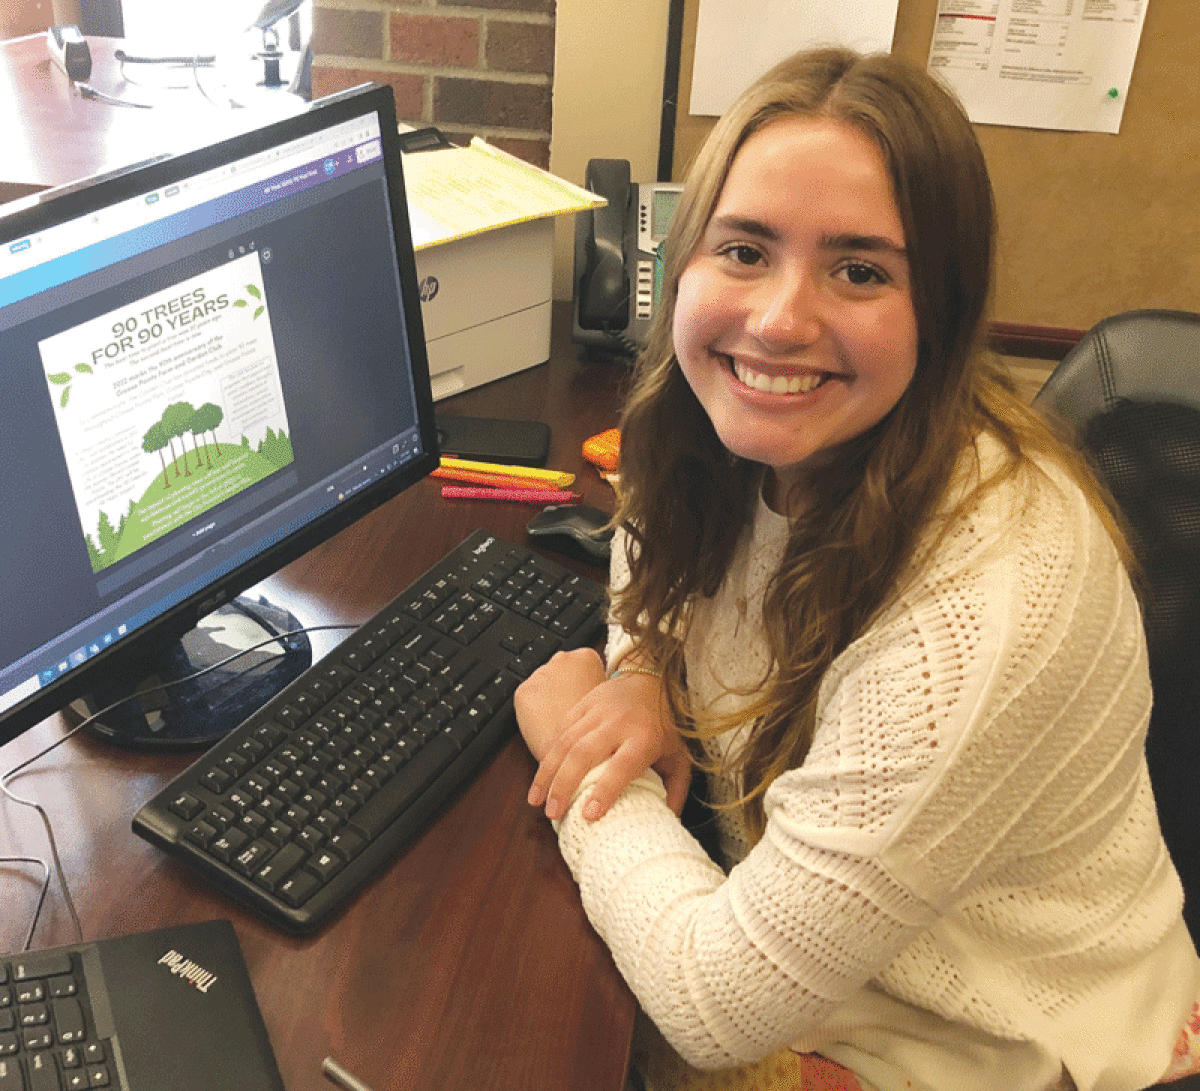  Caroline Parthum, of Grosse Pointe City, a Michigan State University student, enhanced Grosse Pointe Farms’ social media presence this summer as an intern with the city 